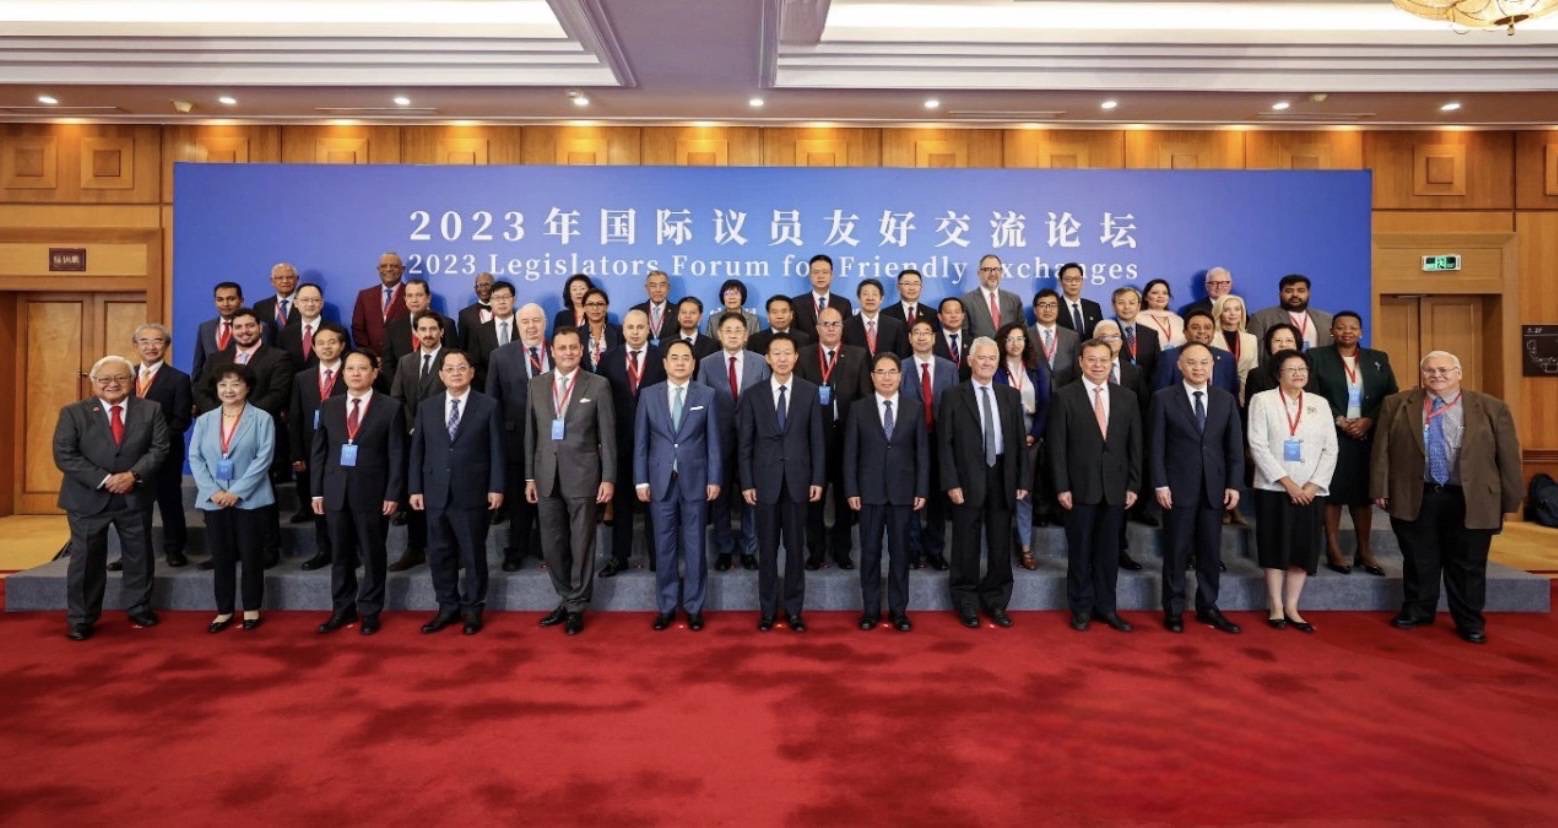 Gen. Surapong Suwana-Adth, Second Vice-Chairman of the Committee on Foreign Affairs and Gen. Teeradej Meepien, Chairman of Advisors of the Committee on Foreign Affairs, attended the 2023 Legislators Forum for Friendly Exchanges in Shenzhen, the People’s R